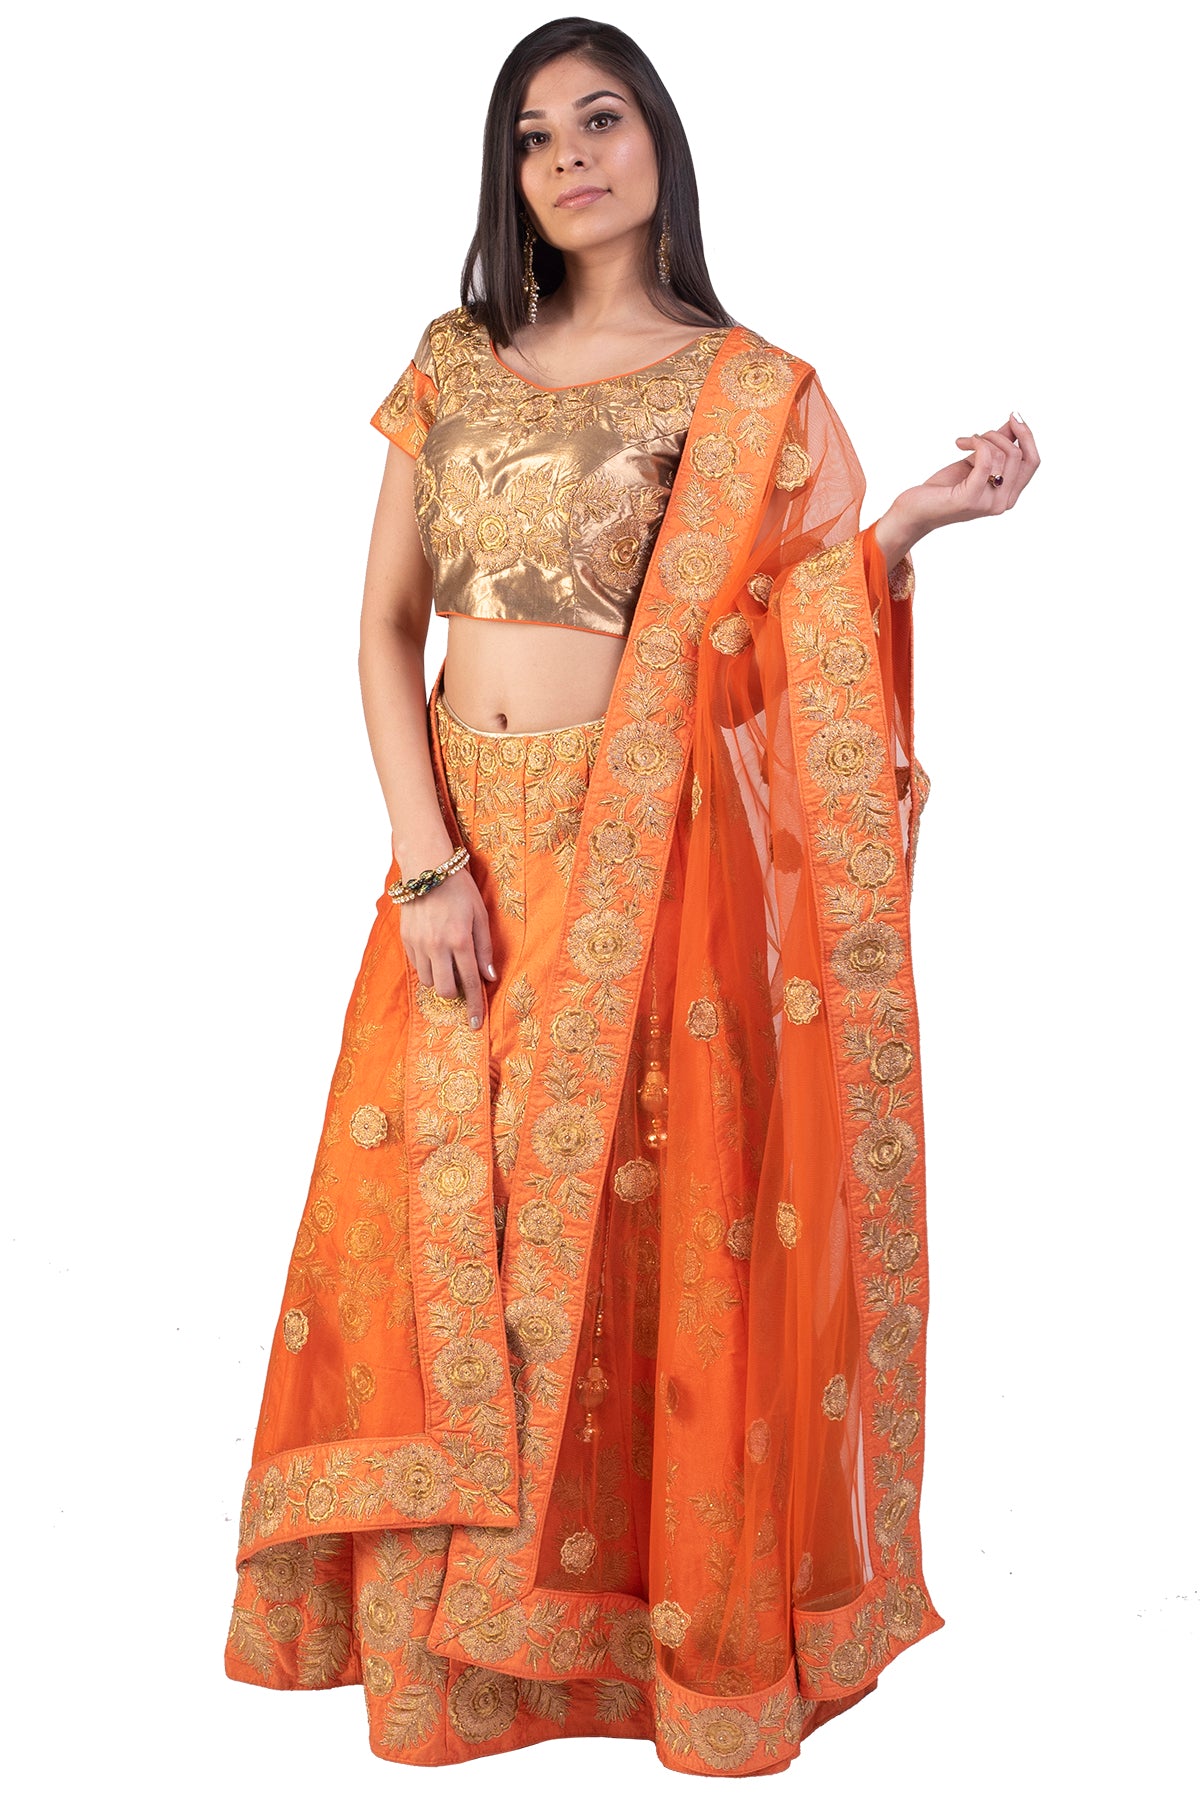 The intricate floral work in zardosi on the orange lehenga is perfect for a mehendi and sangeet function. A show-stopper look, without a doubt.